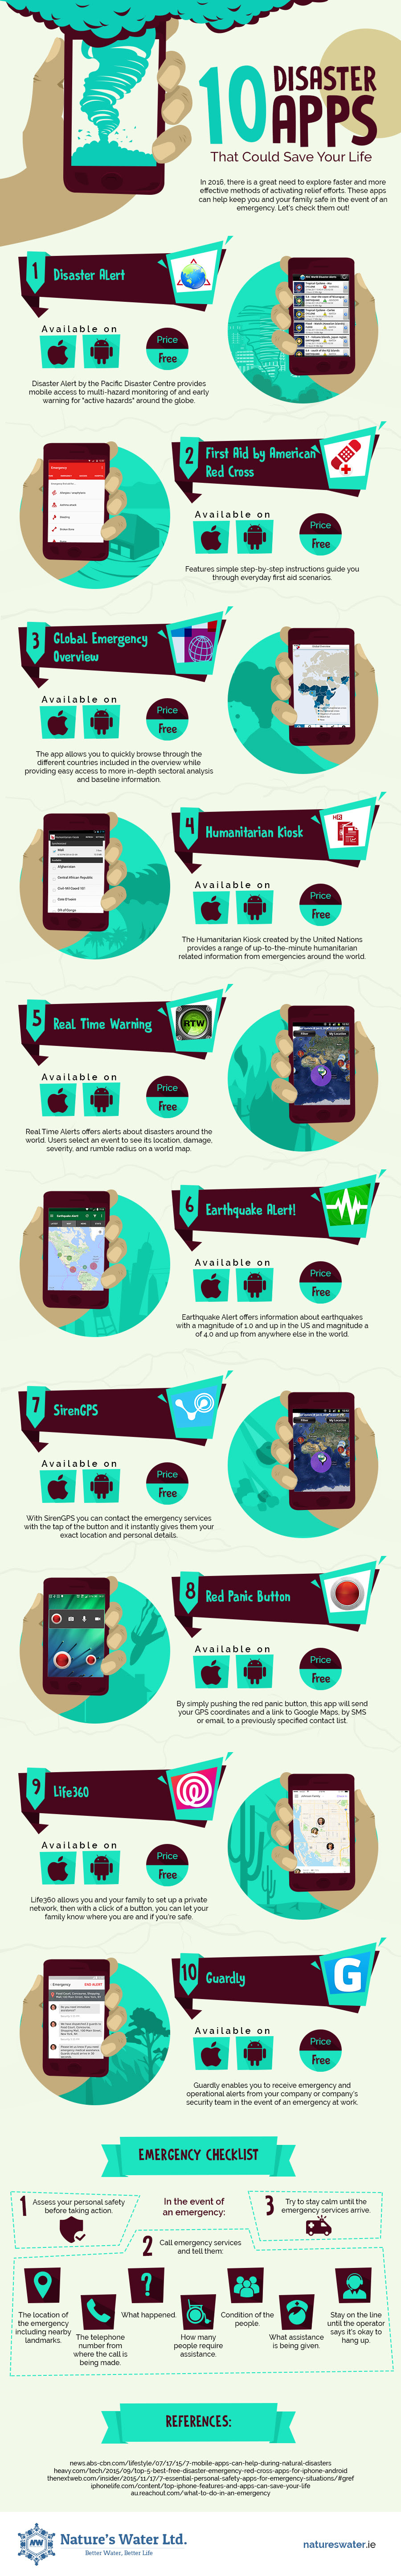 10 Natural Disaster Survival Apps for iOS and Android - Infographic